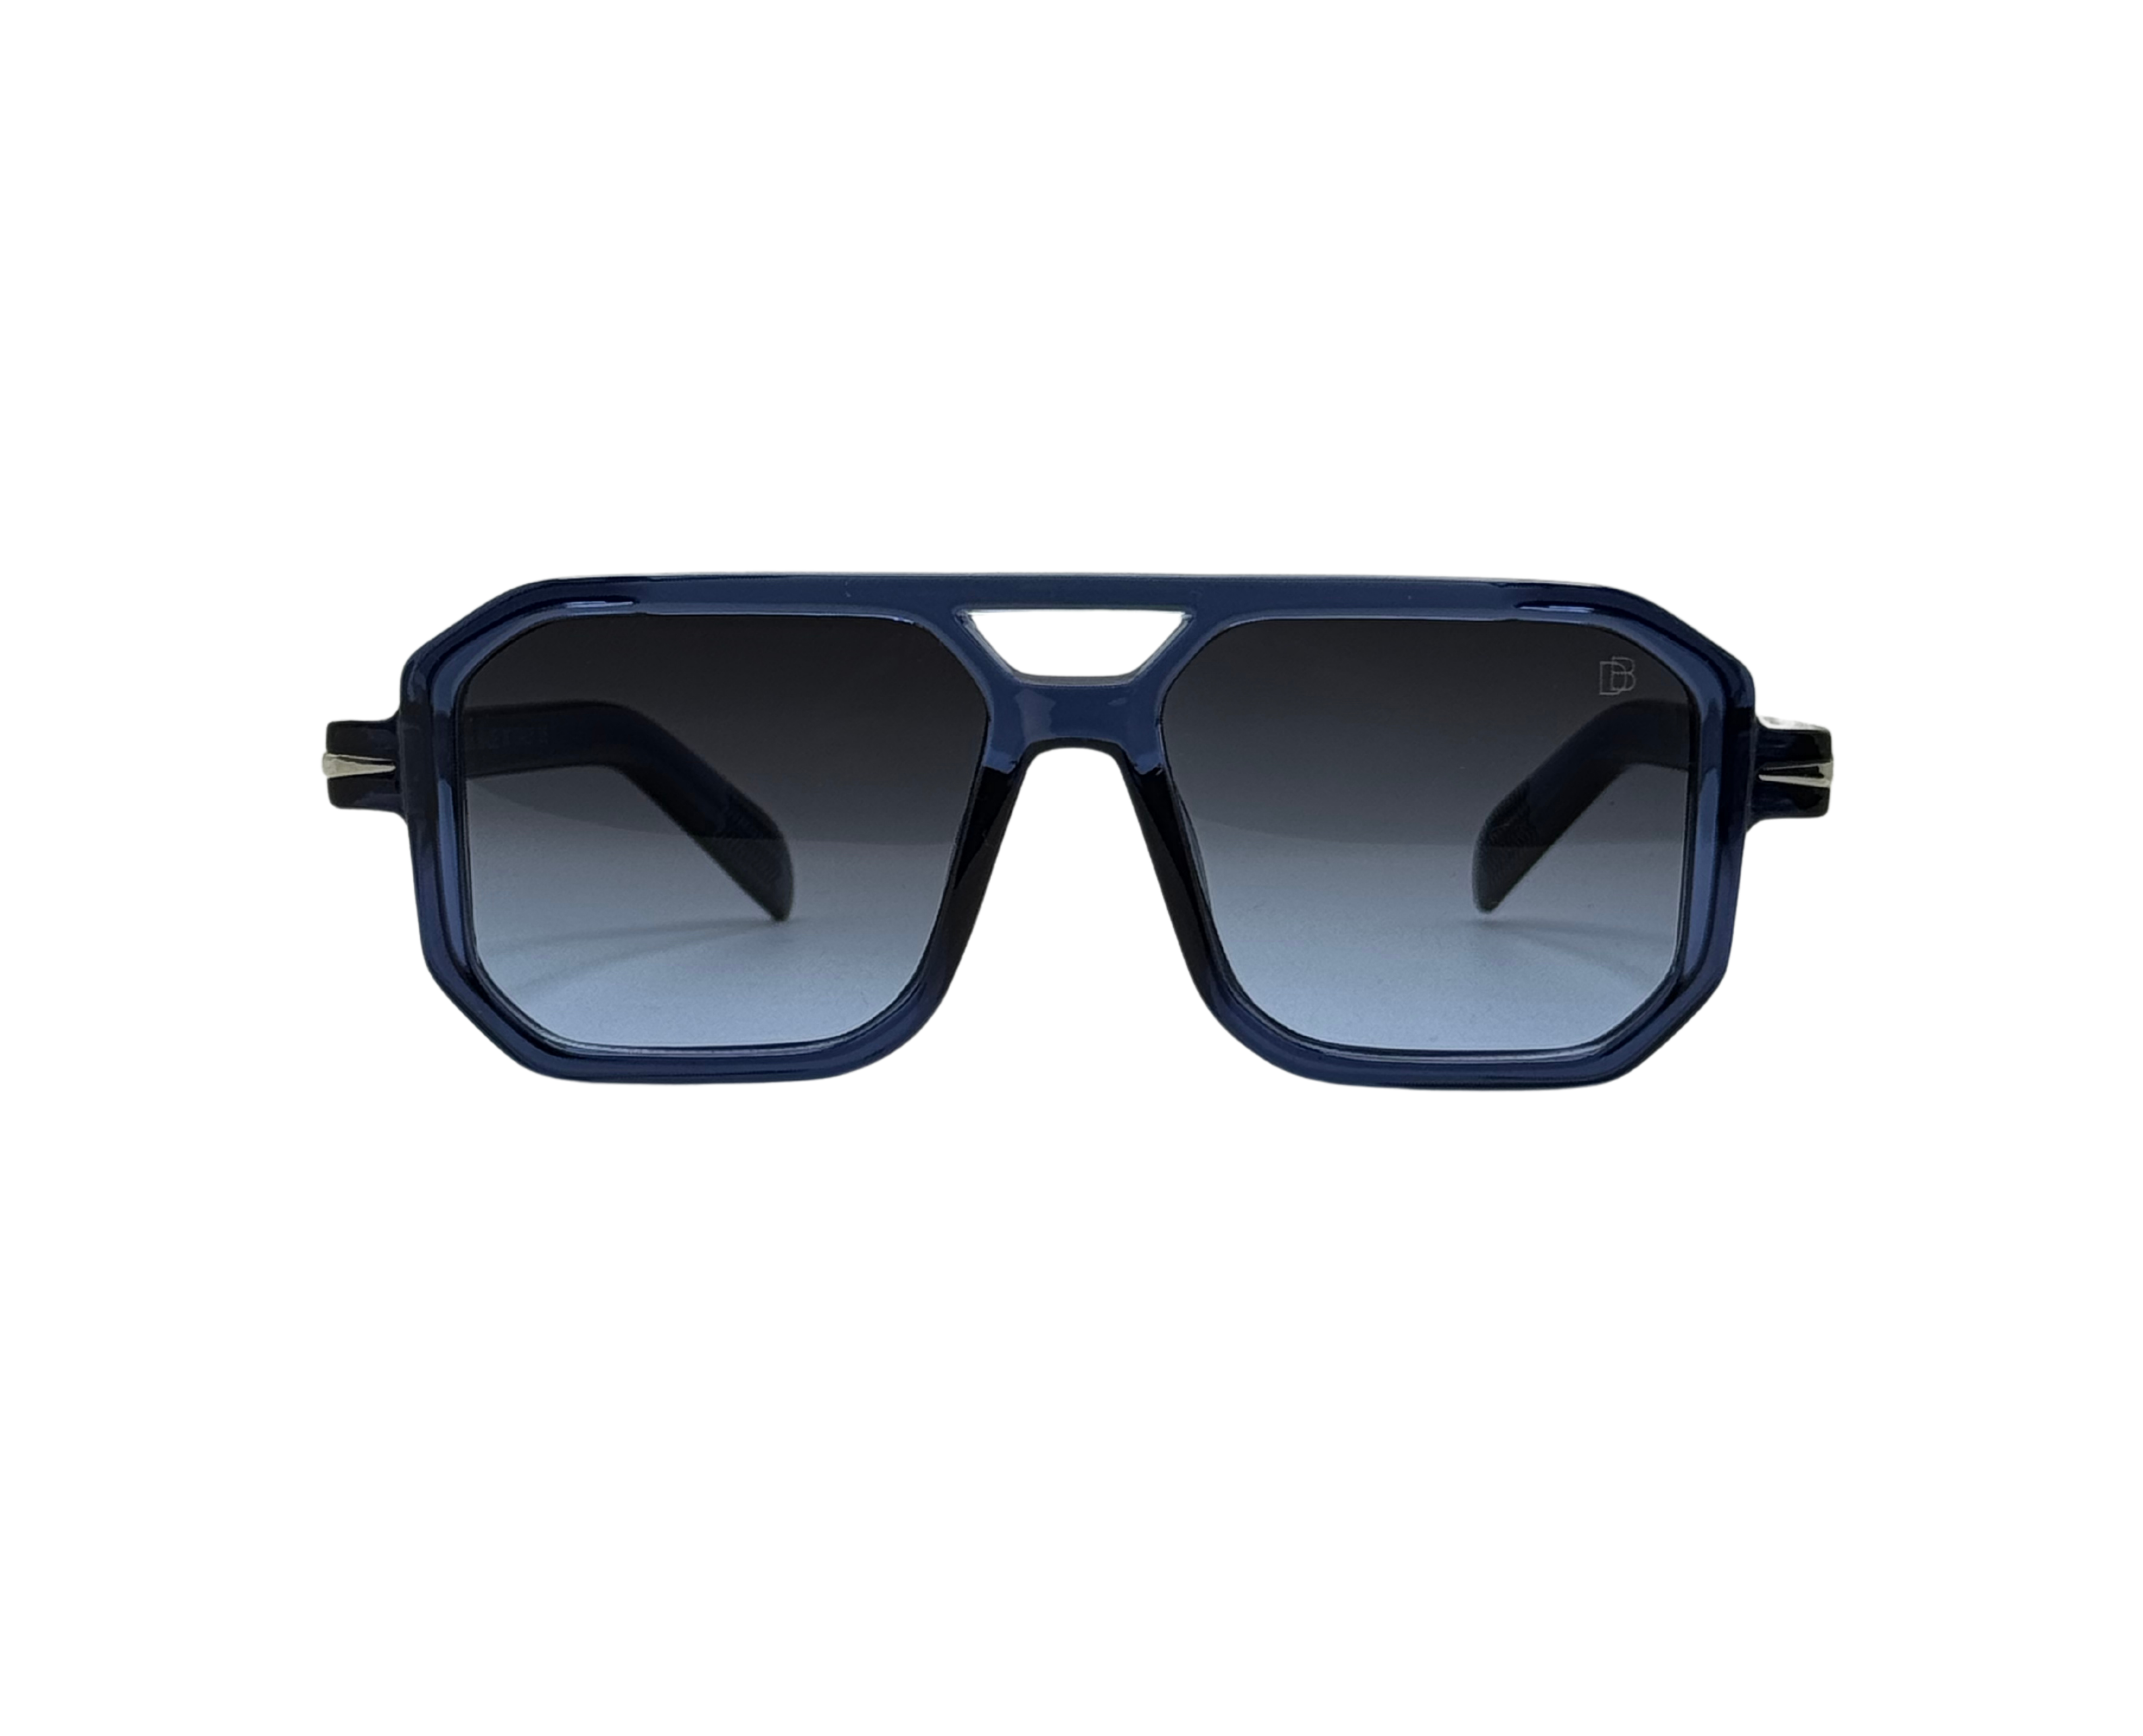 NS Deluxe - 2003 - Blue - Sunglasses